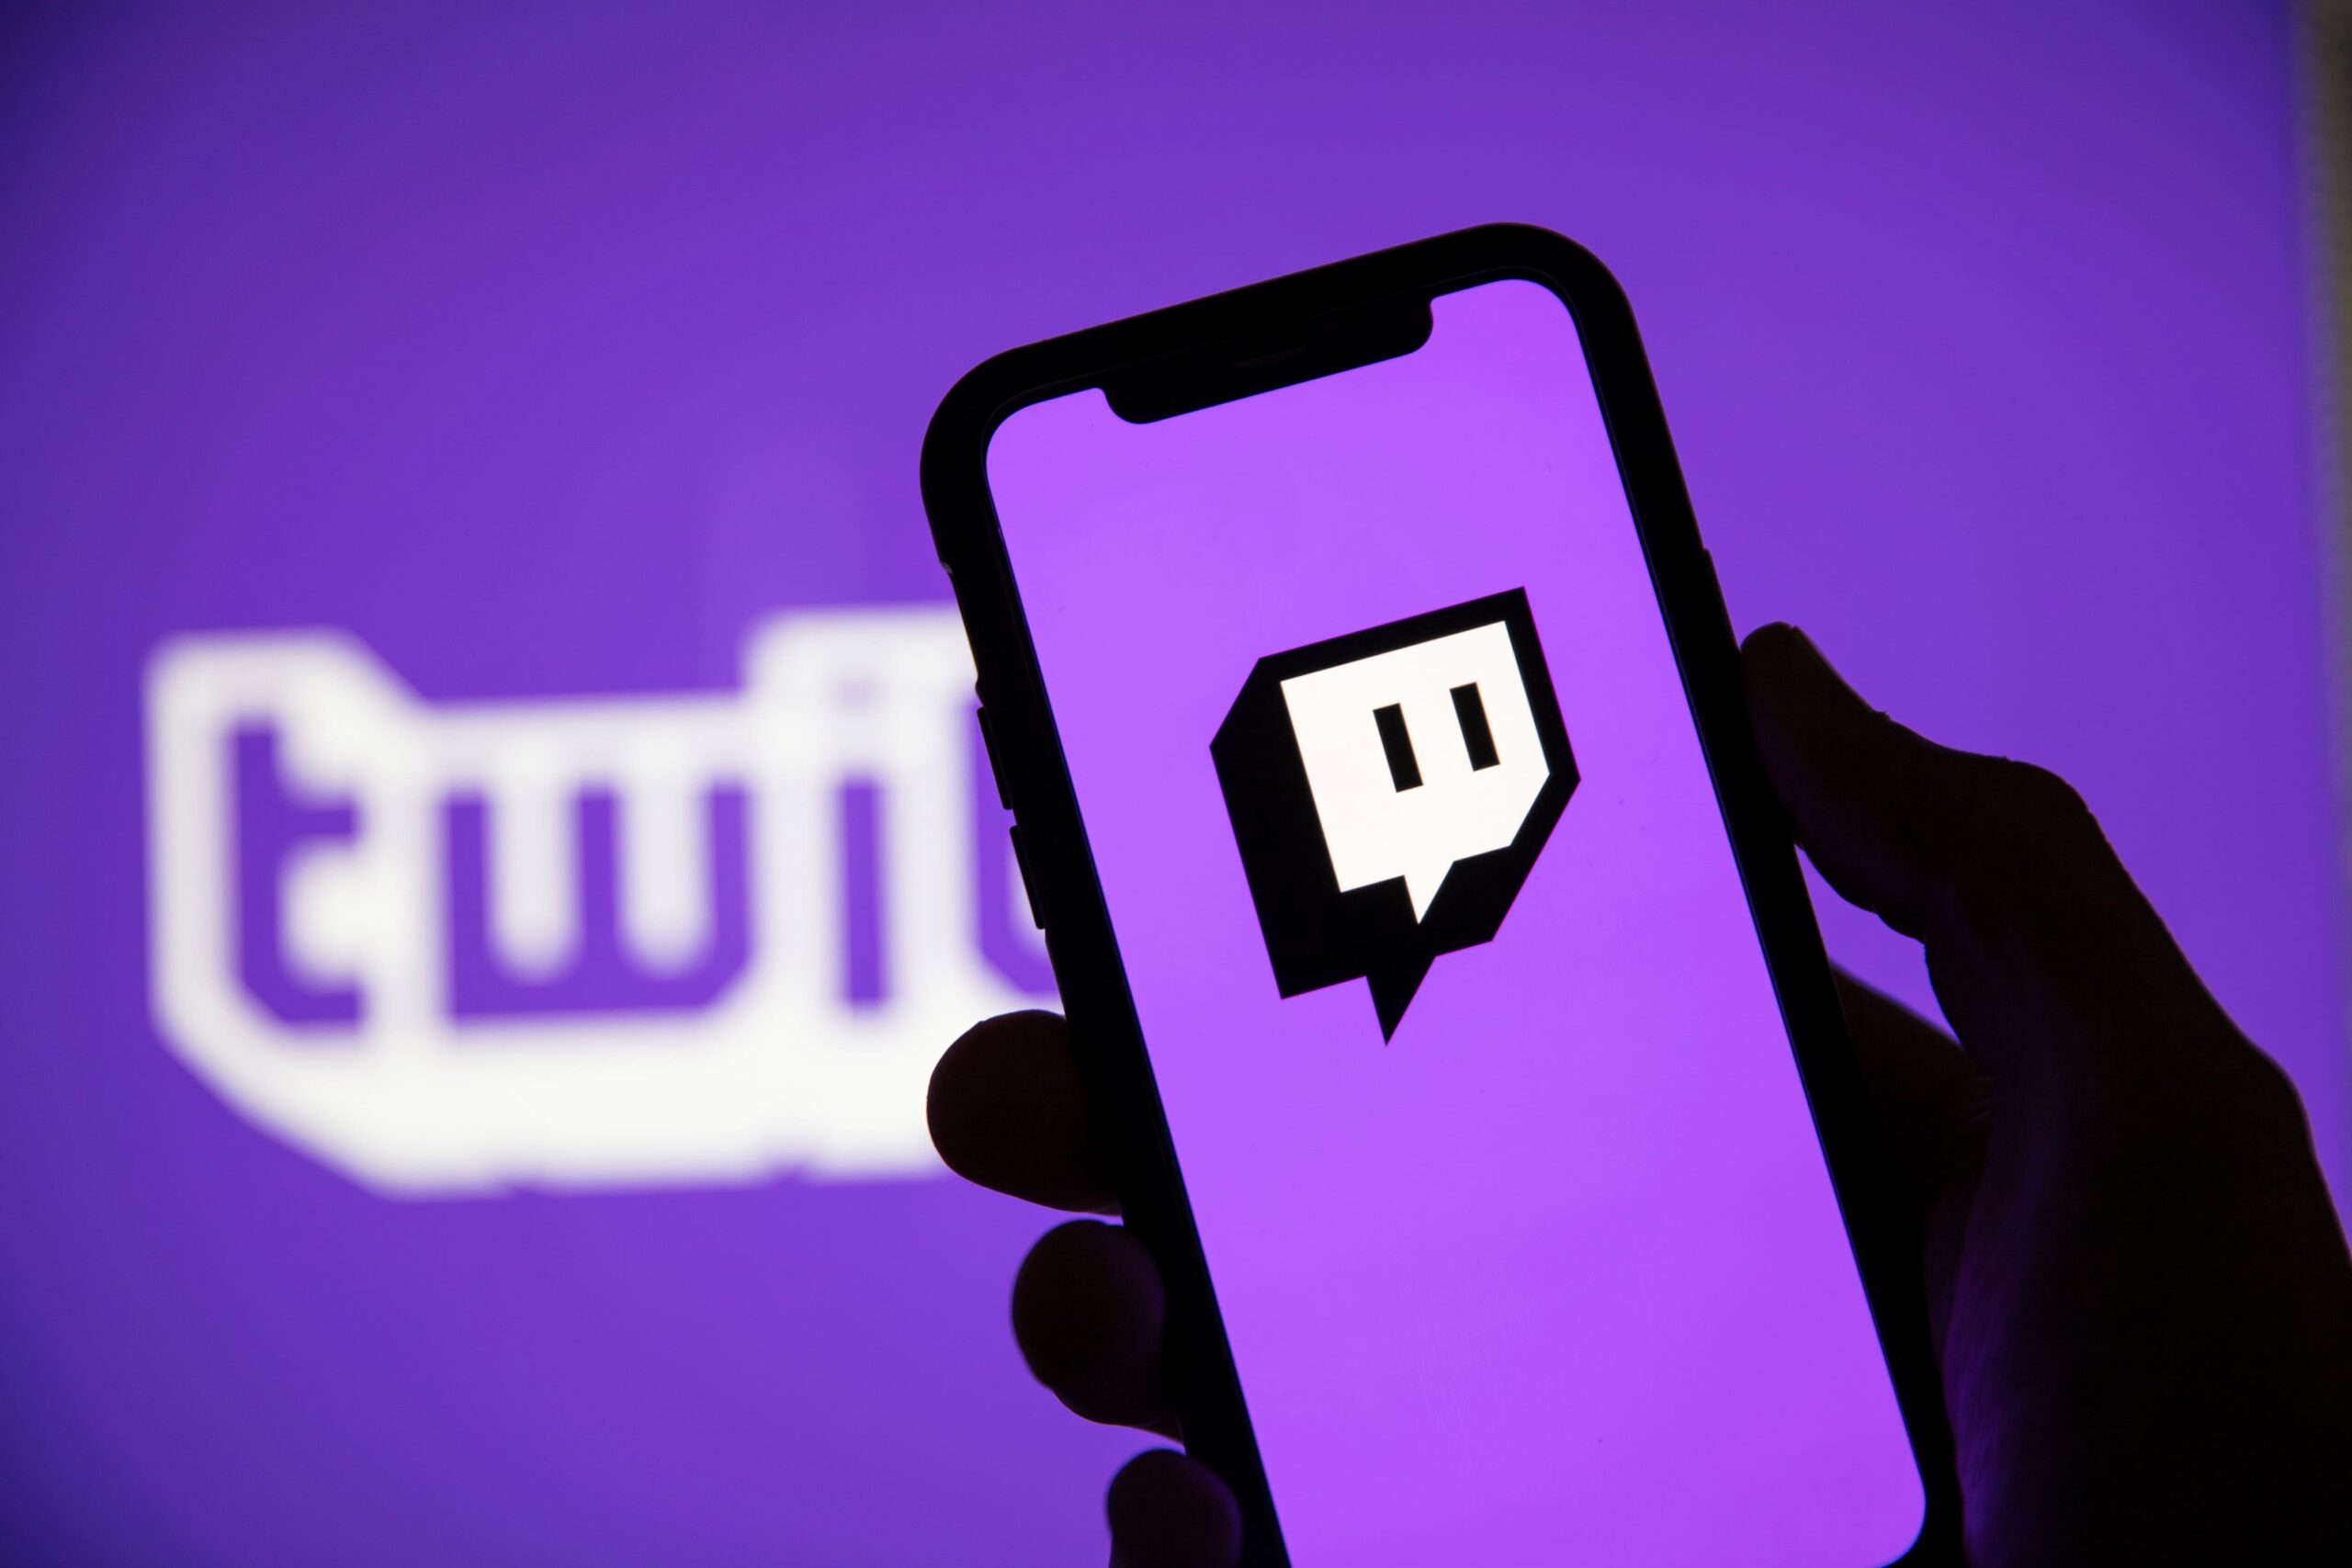 twitch-to-lay-off-another-500-employees-amid-financial-struggles